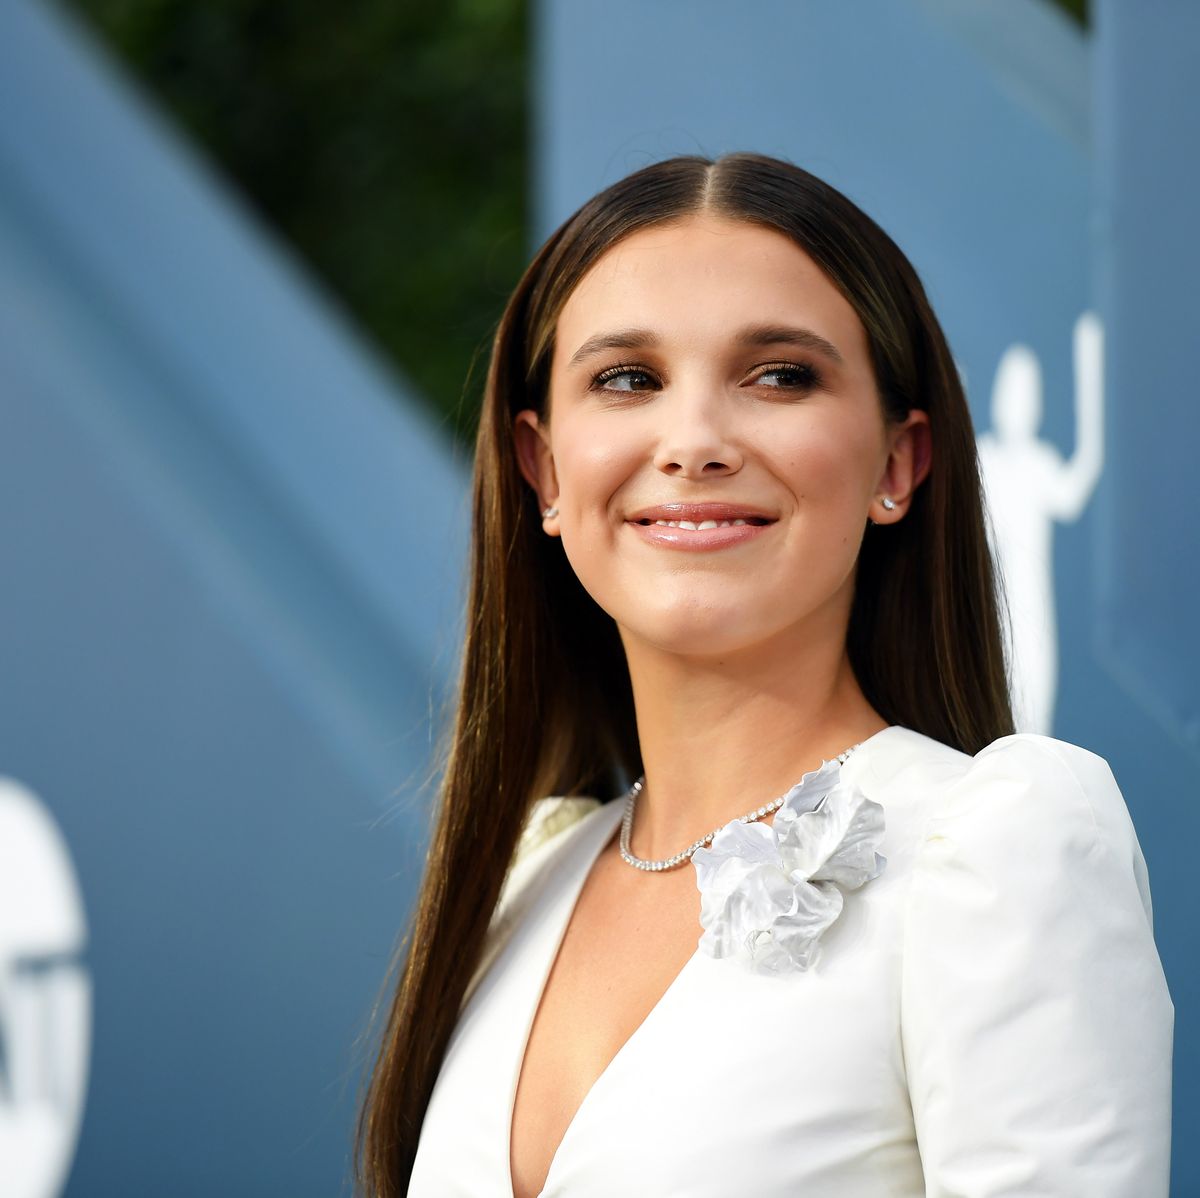 Millie Bobby Brown looks angelic as she hits the SAG Awards red carpet in a  pristine white ensemble